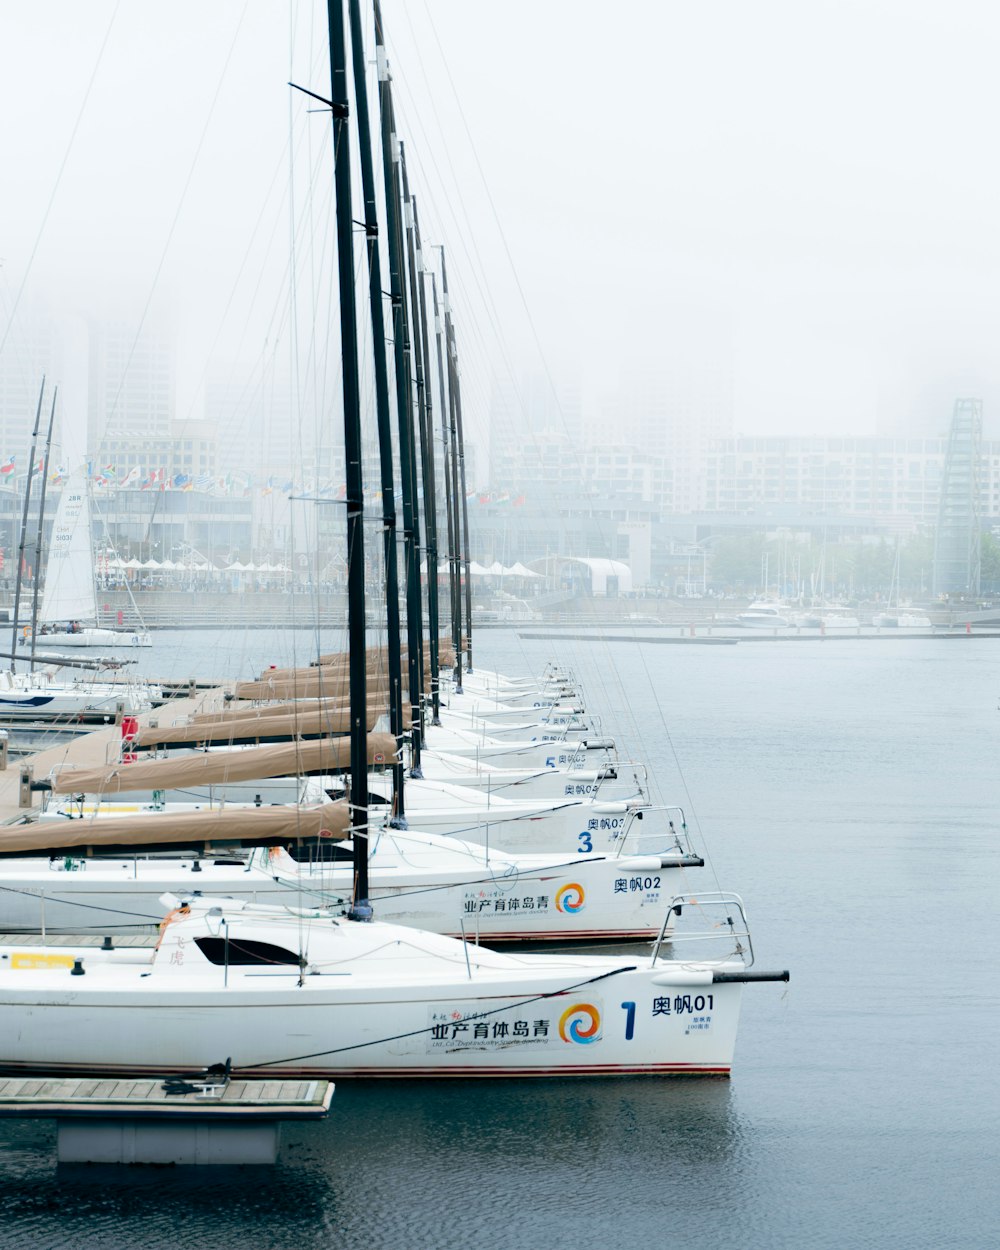 a row of sailboats in a harbor on a foggy day